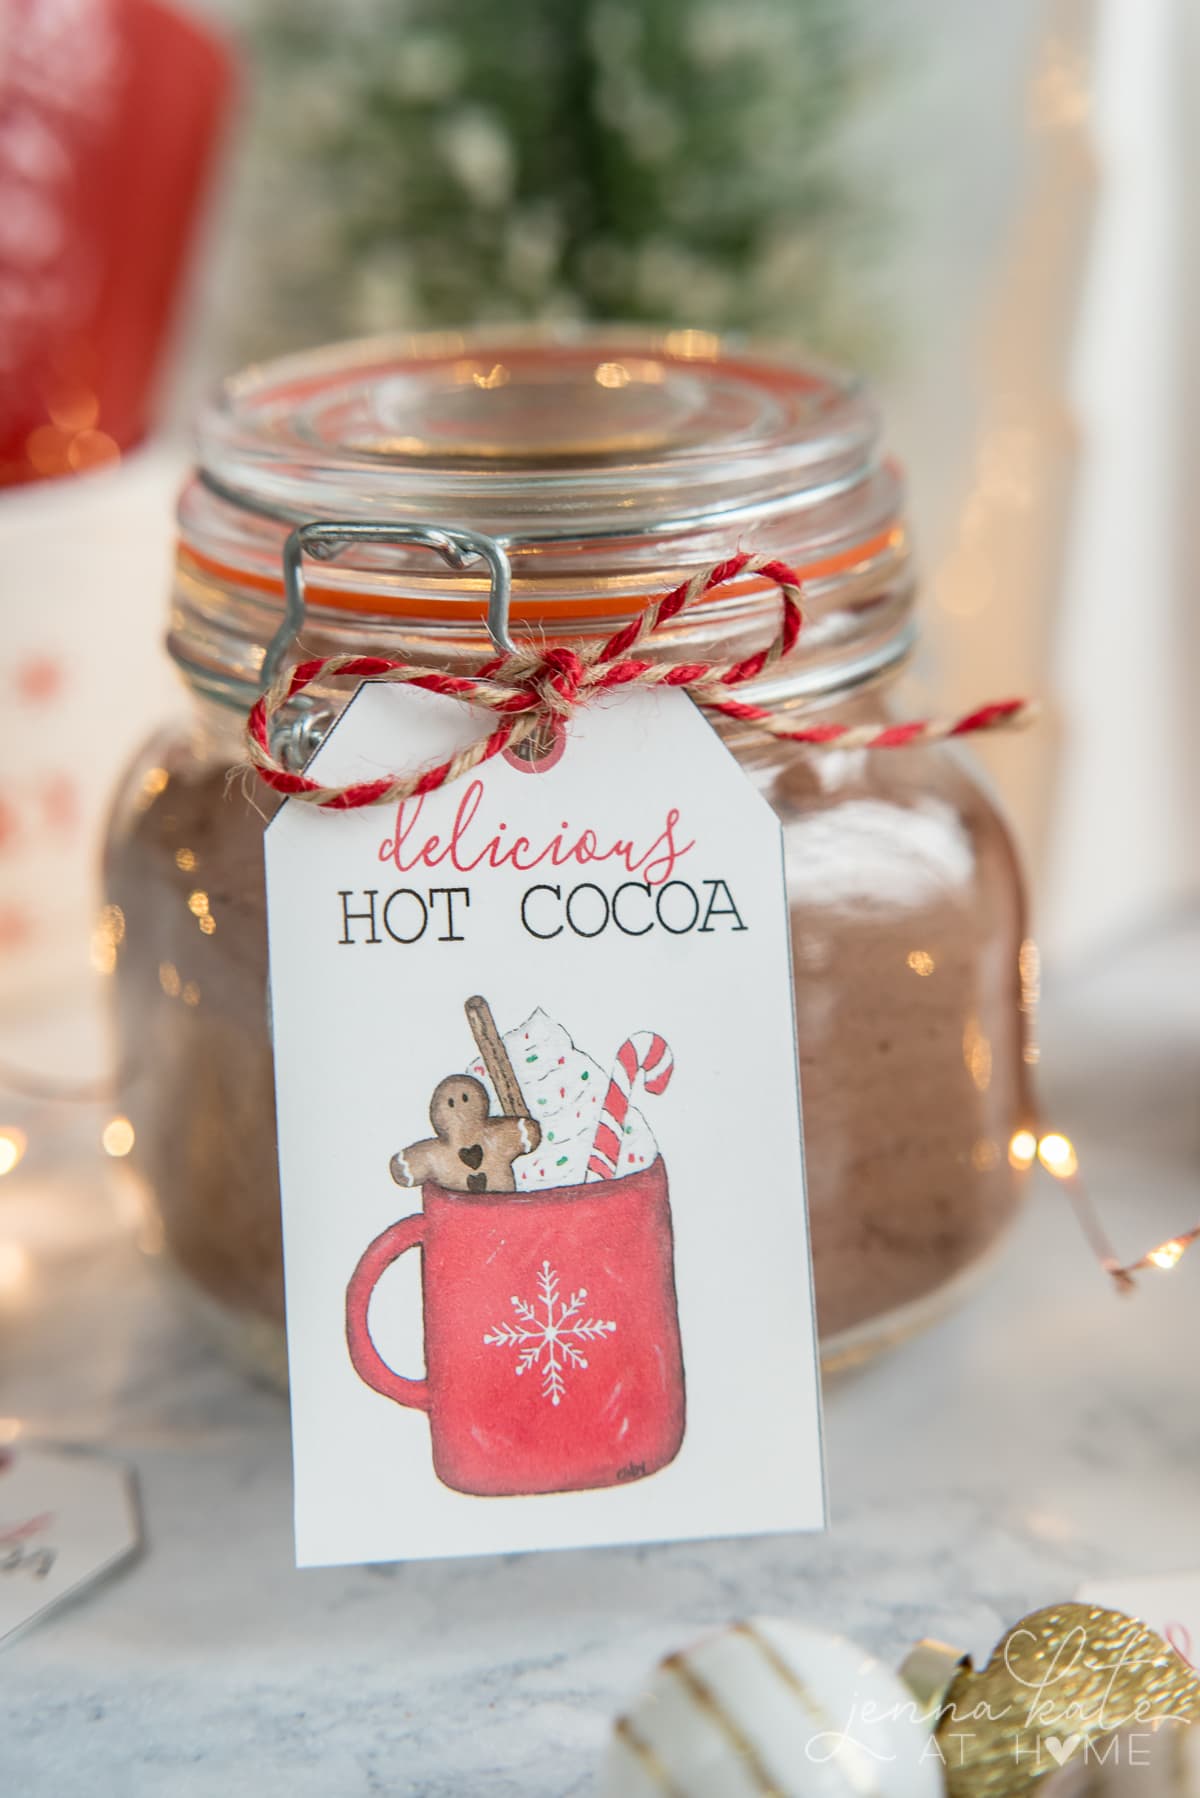 Hot chocolate mix in a canister with a hand painted gift tag that says delicious hot cocoa